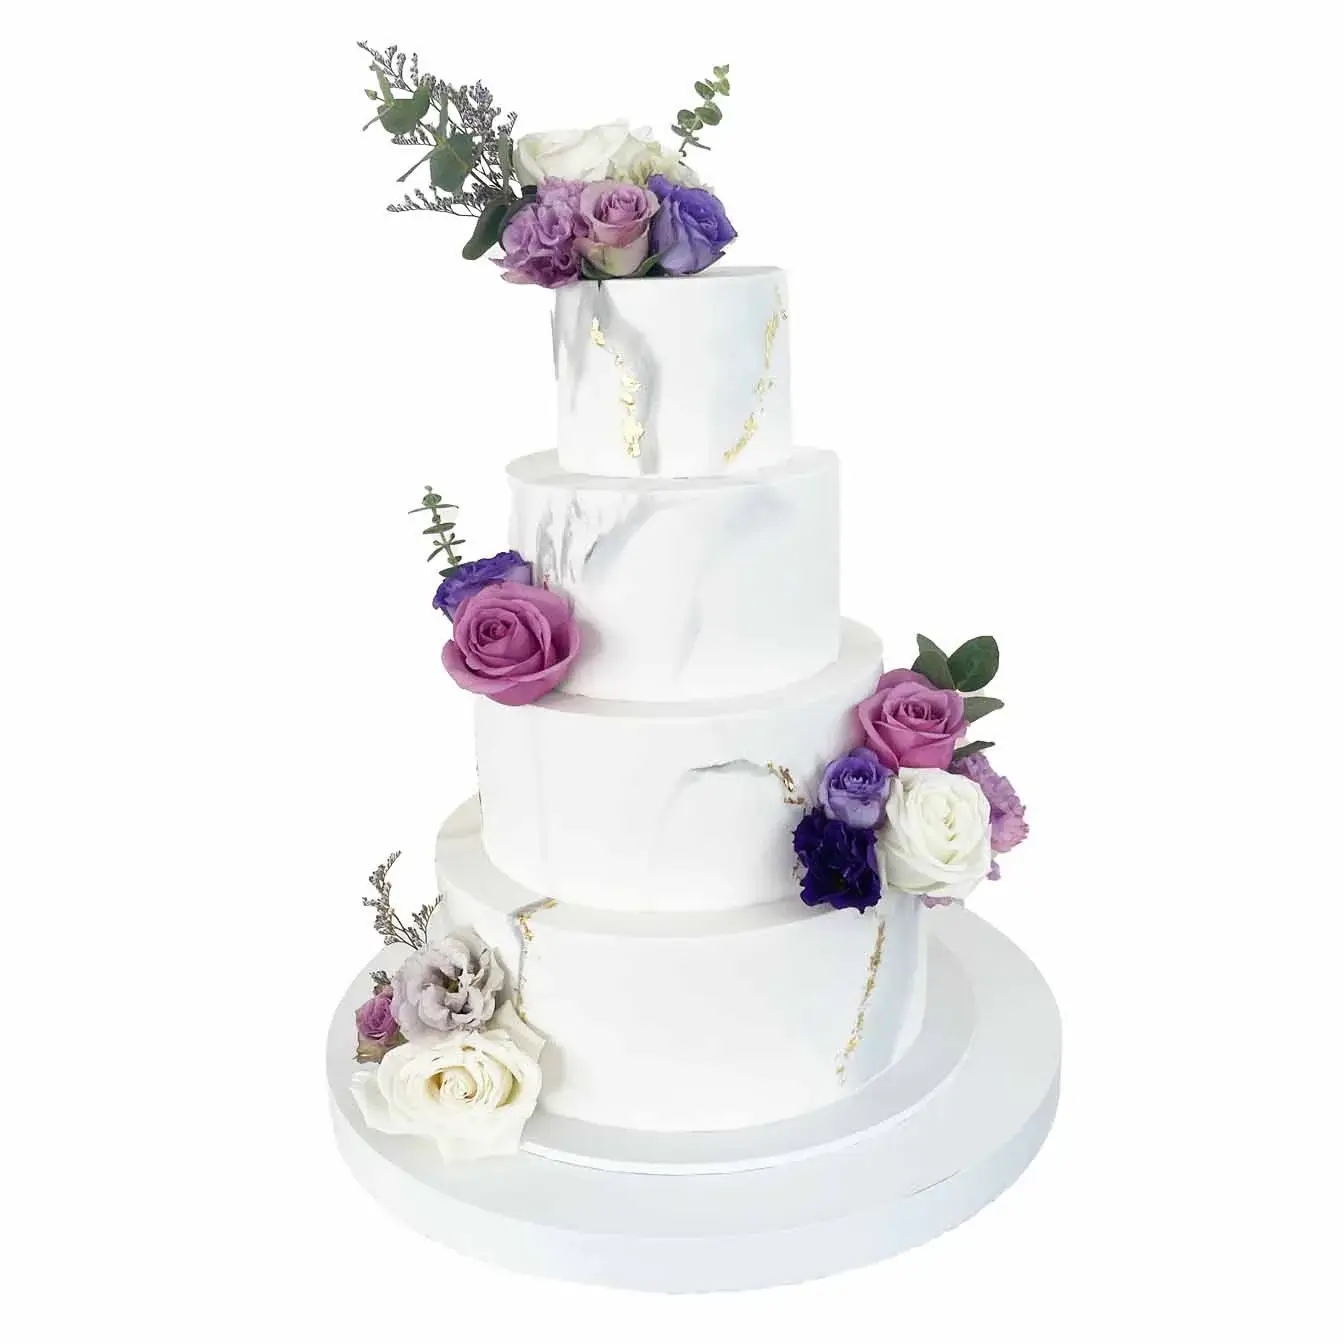 Floral Marble Symphony Wedding Cake - A four-tier cake with white and grey marble patterns, adorned with fresh flowers in your choice of color, a contemporary and personalized centerpiece for weddings filled with refined beauty and enduring love.